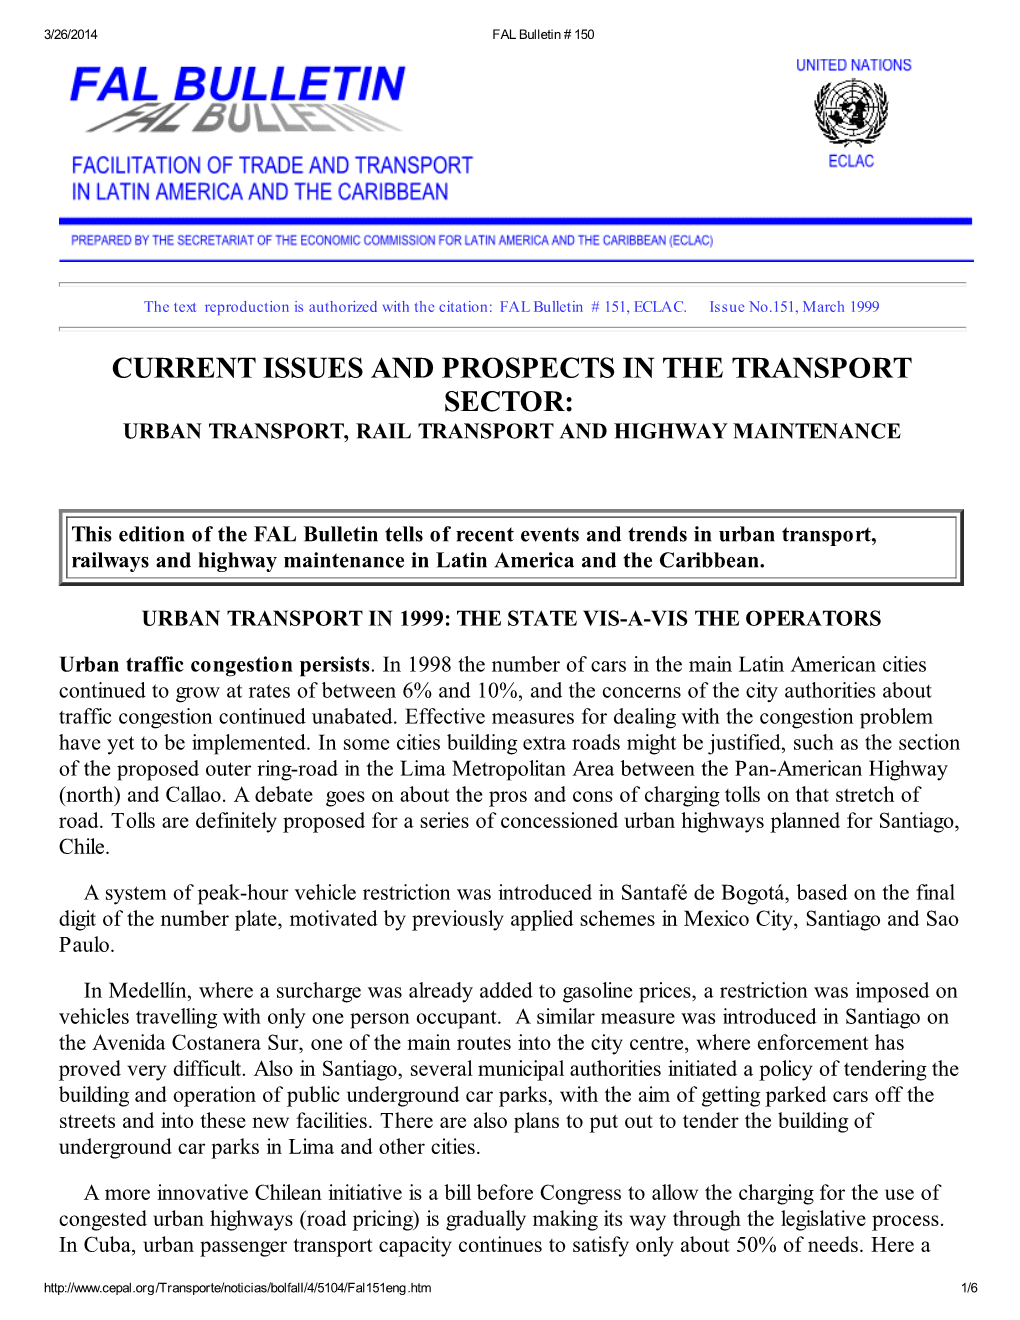 Current Issues and Prospects in the Transport Sector: Urban Transport, Rail Transport and Highway Maintenance